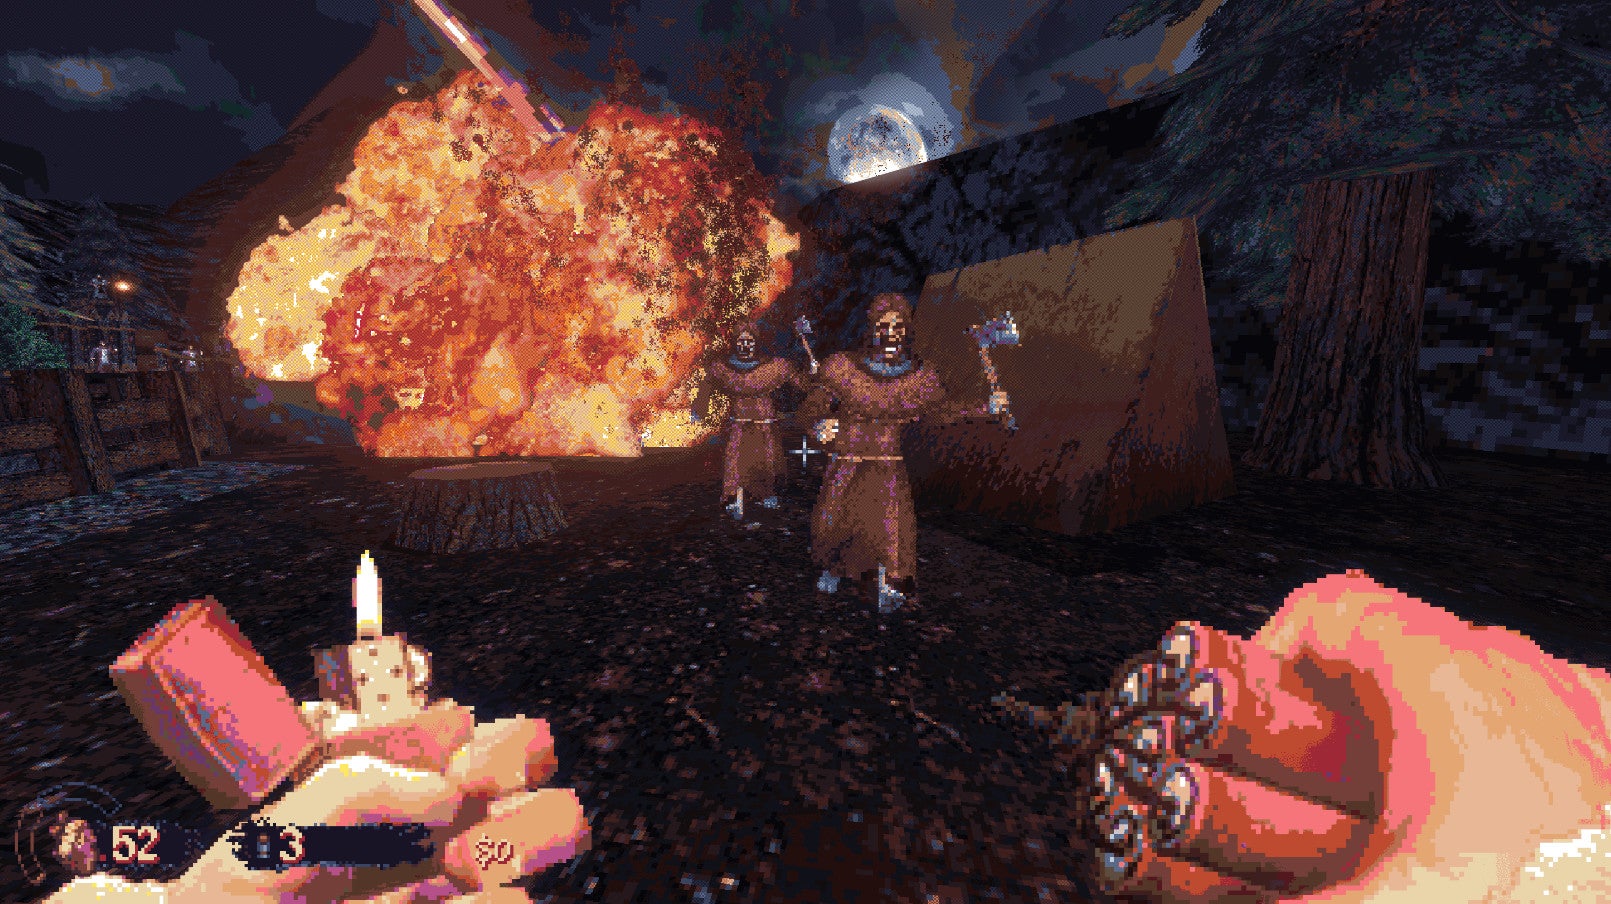 Two cultists run away from an explosion caused by the player's dynamite.